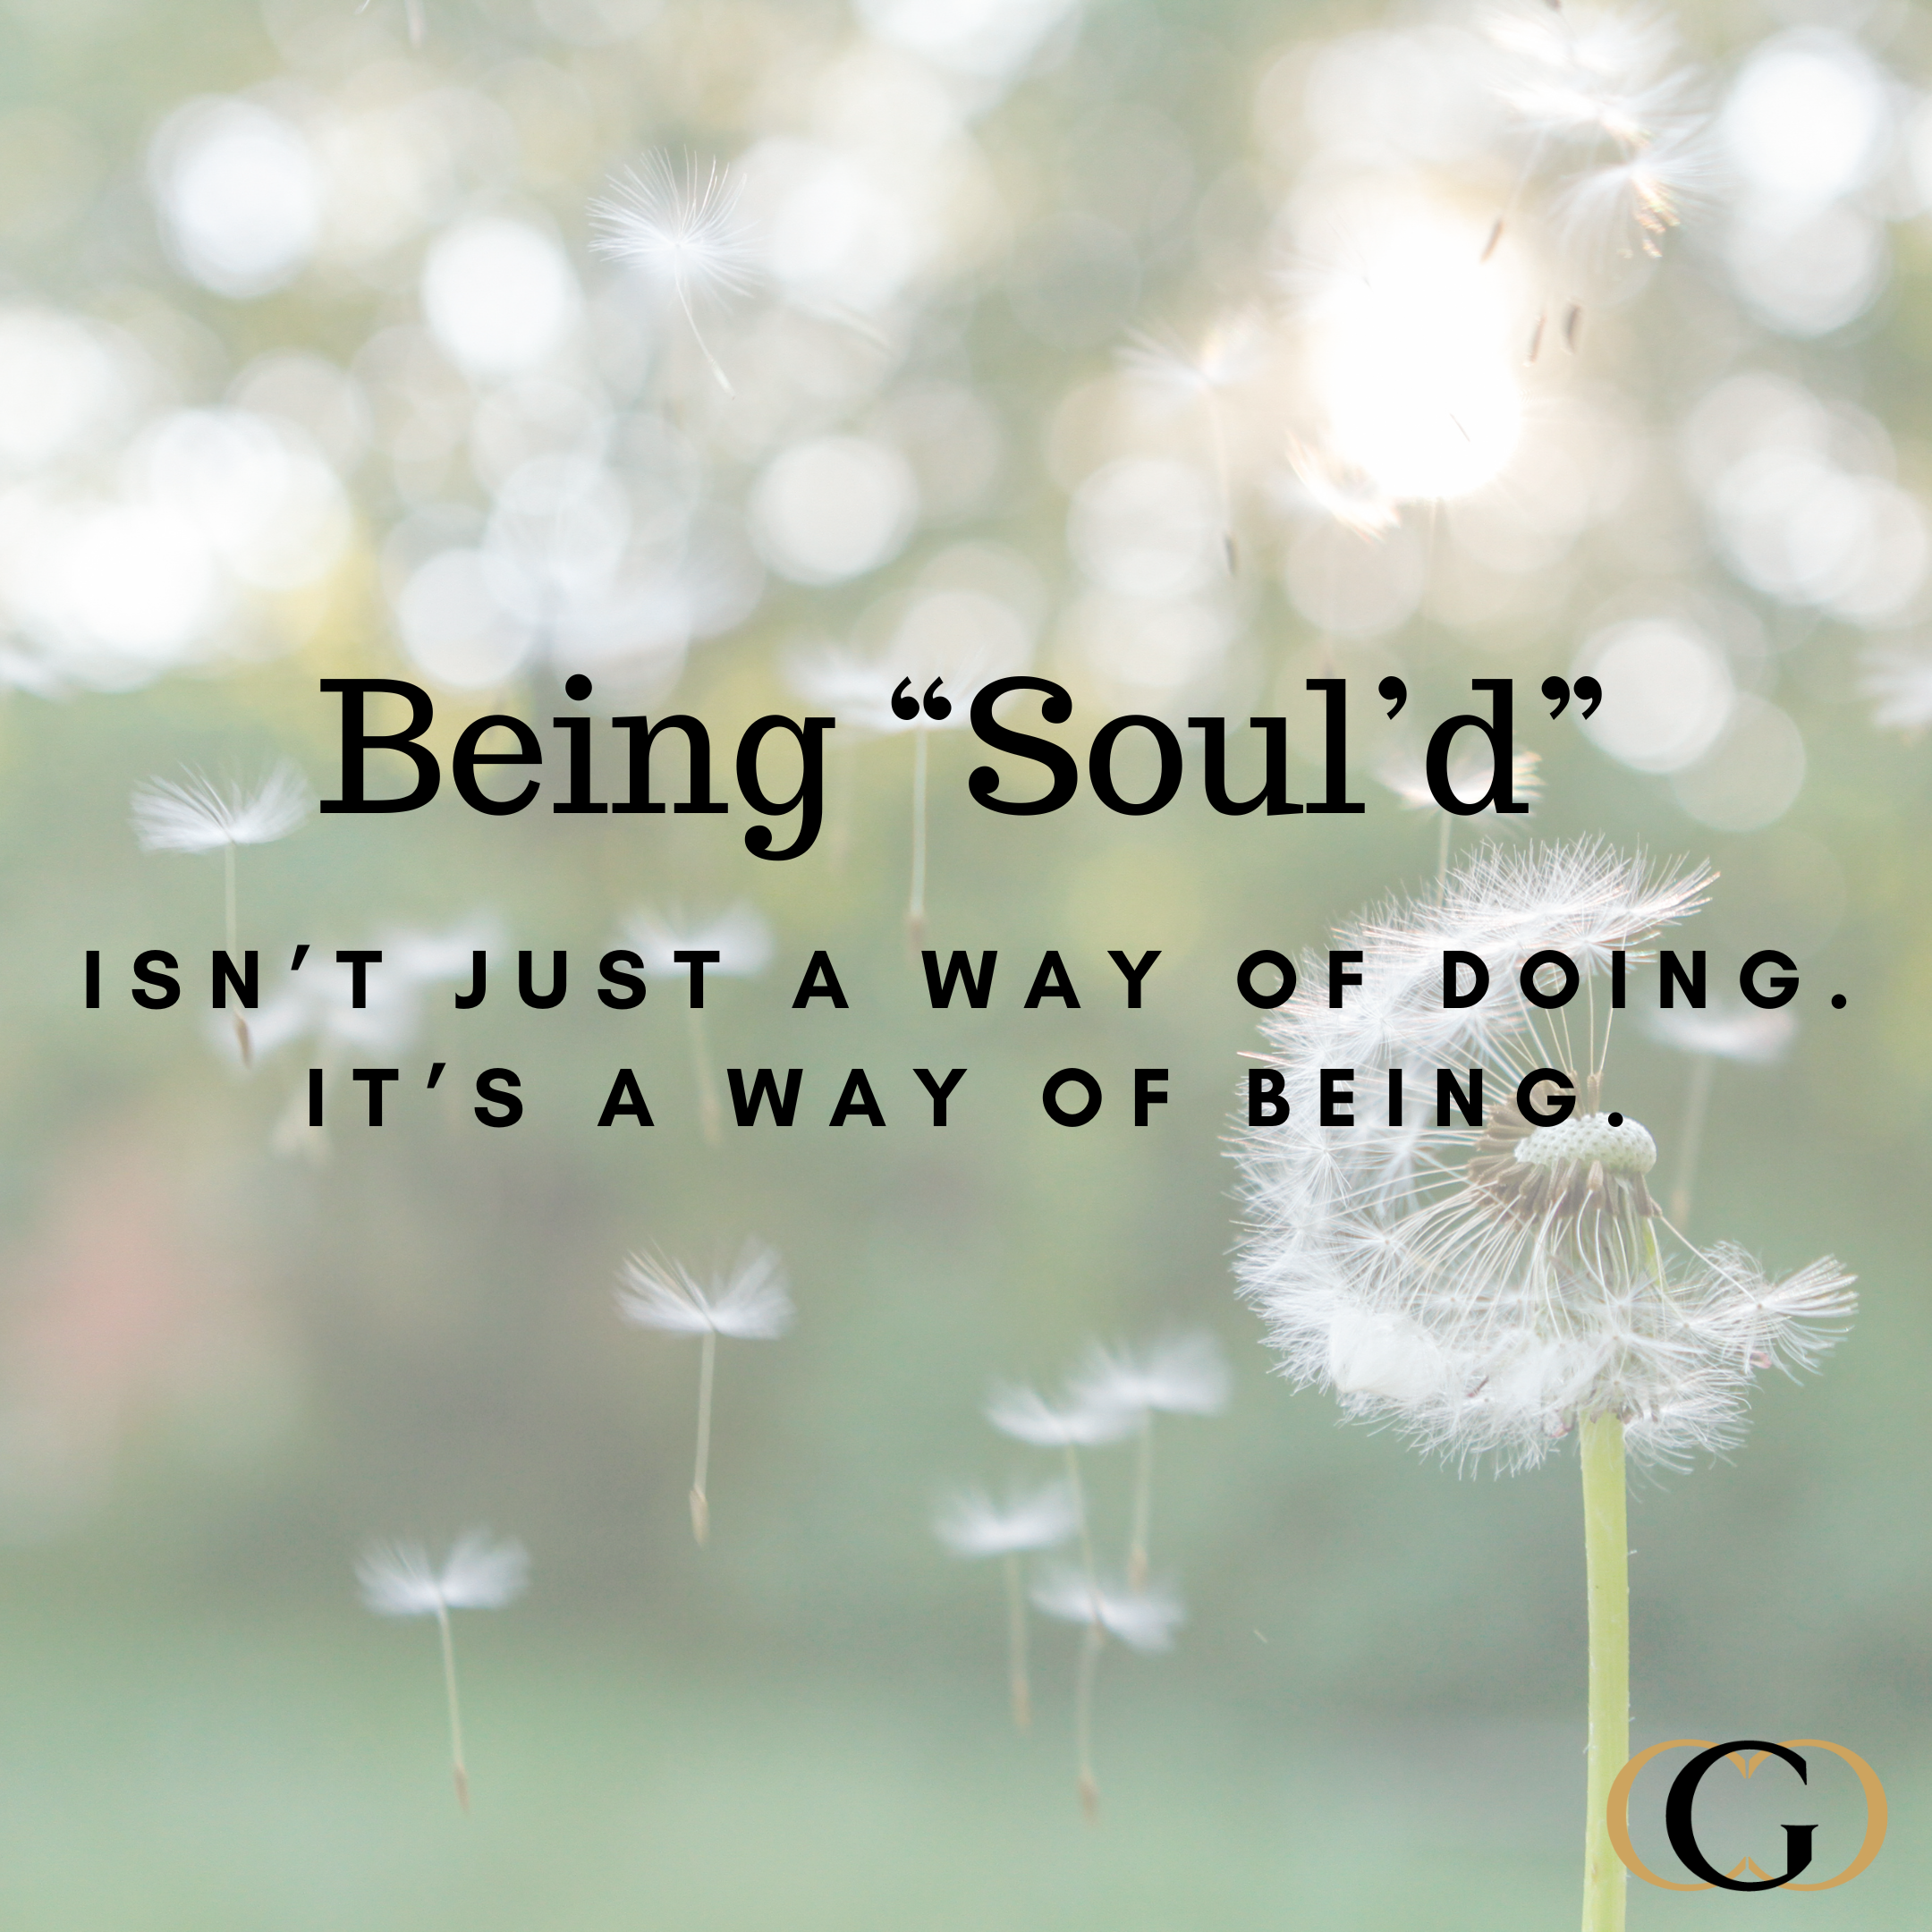 Being Soul'd isn't just a way of doing. It's a way of being.